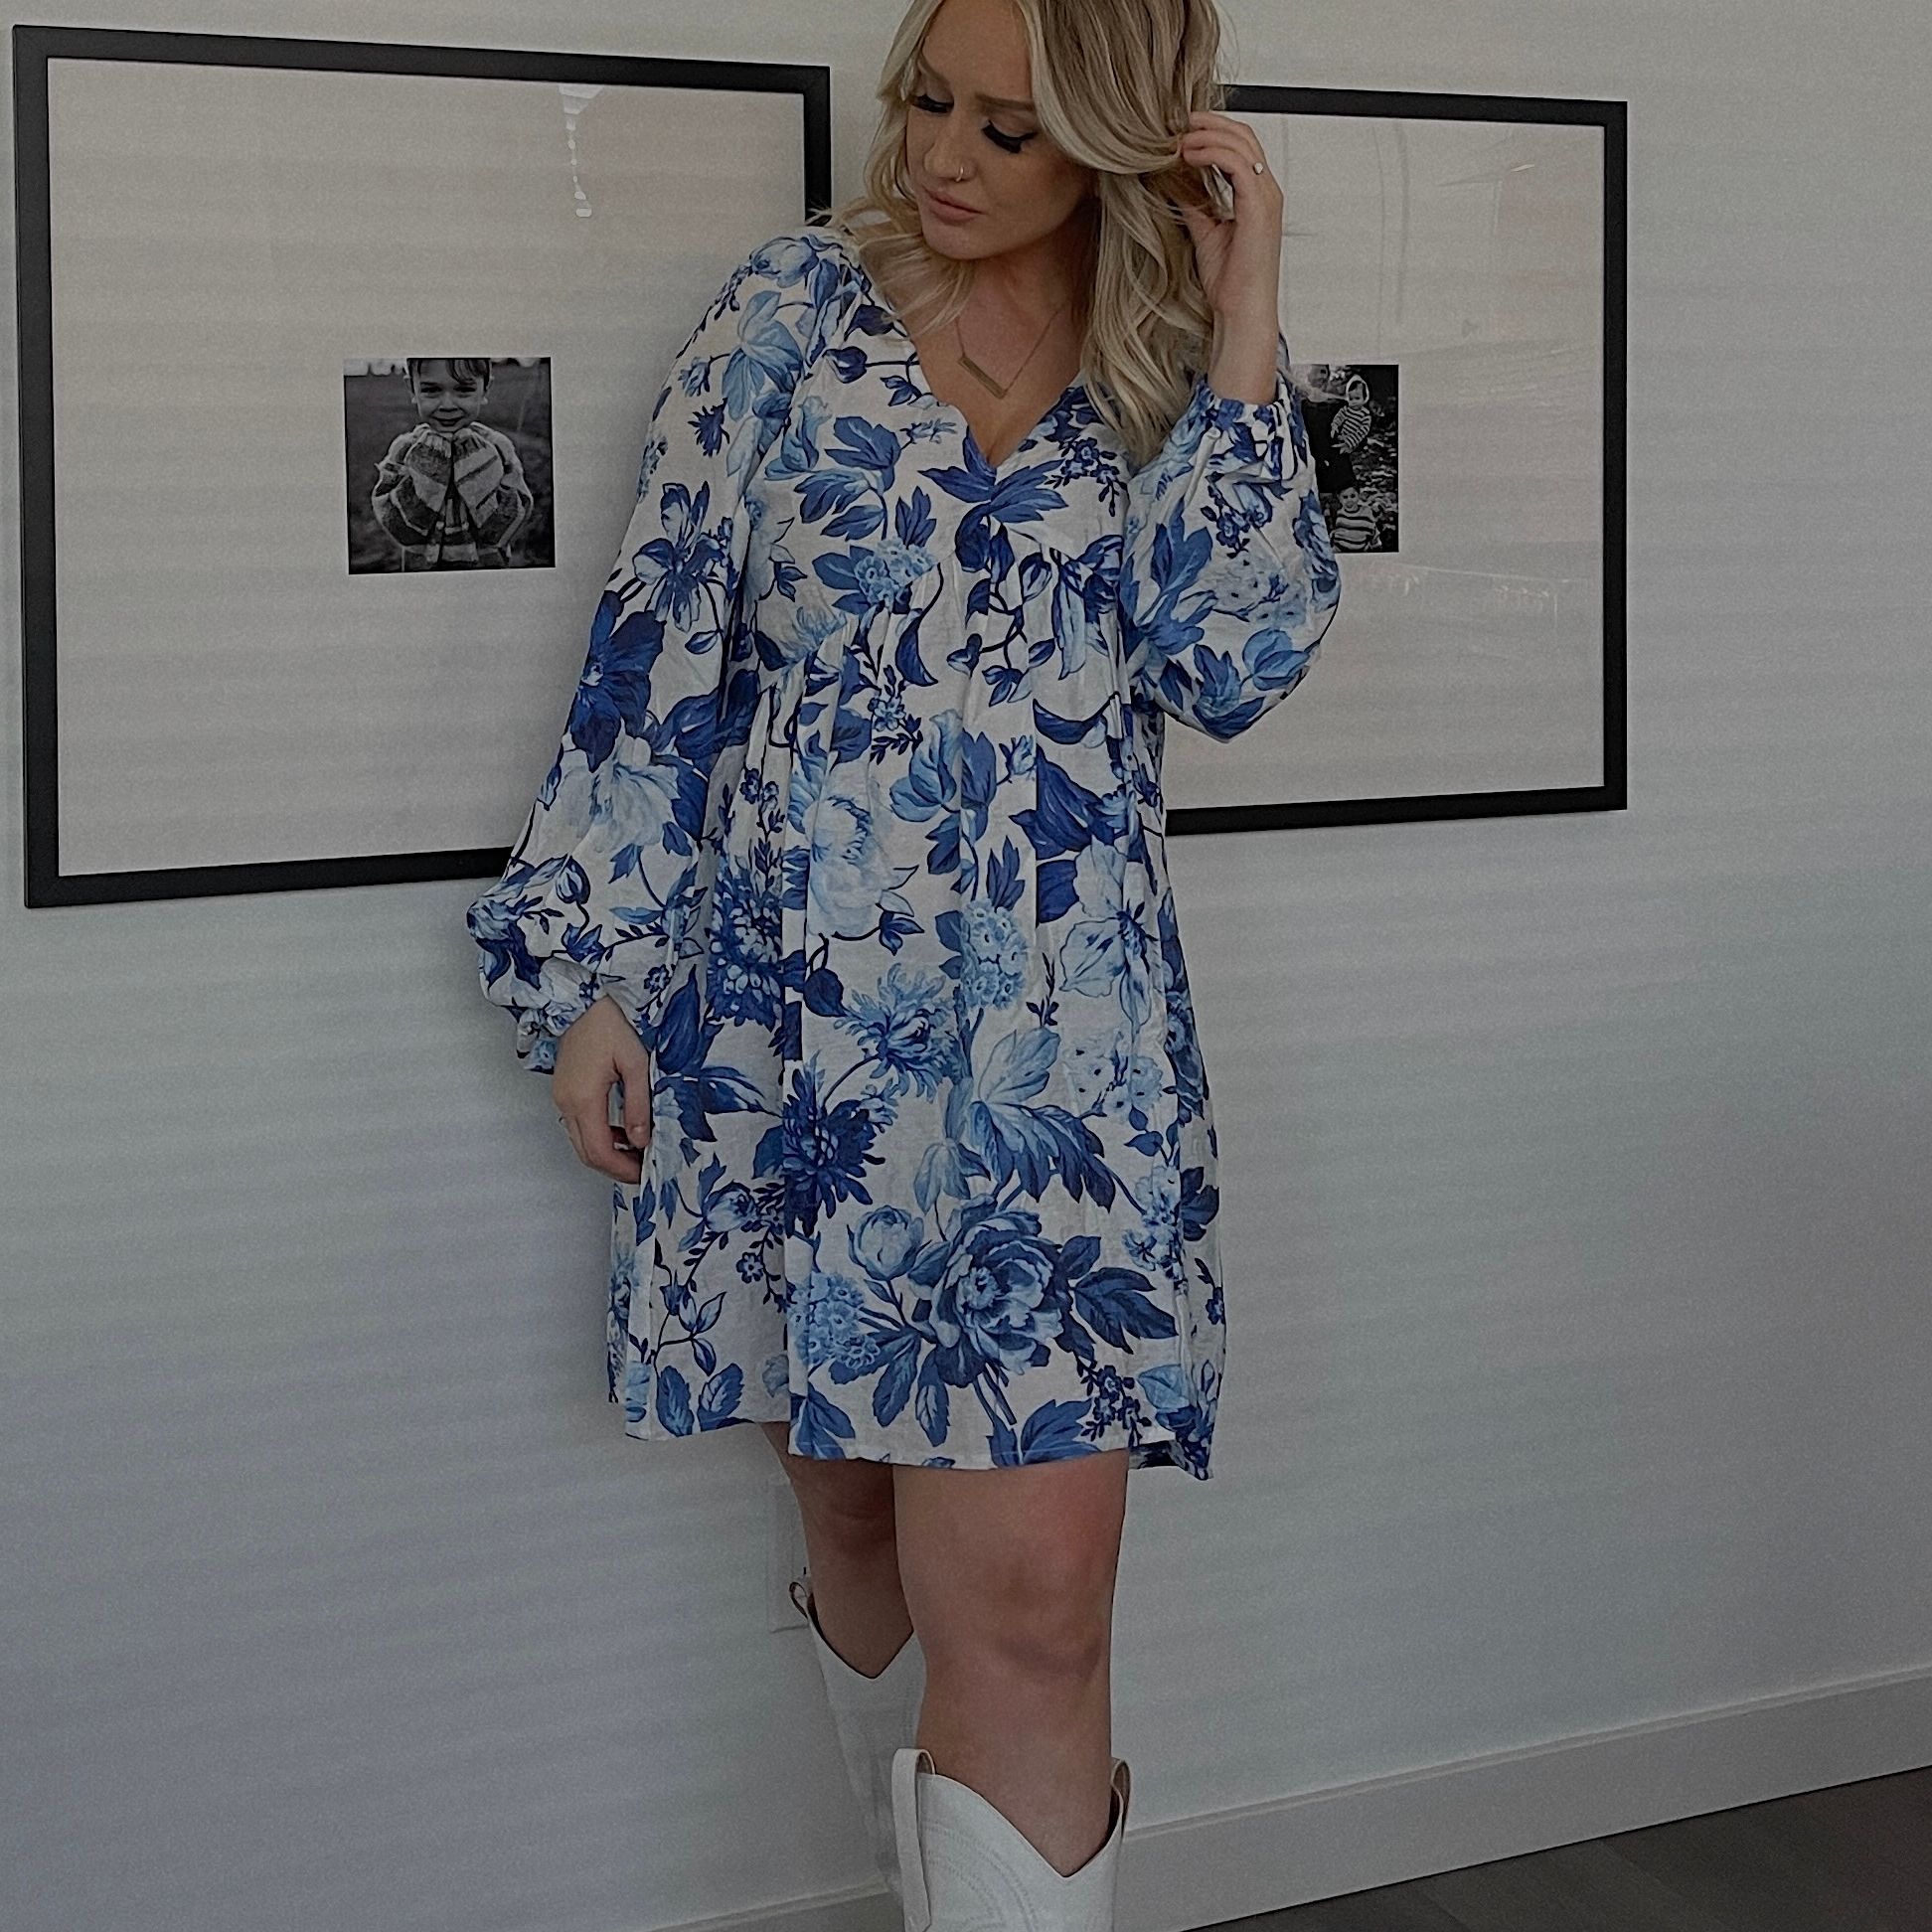 Floral dress with white boots